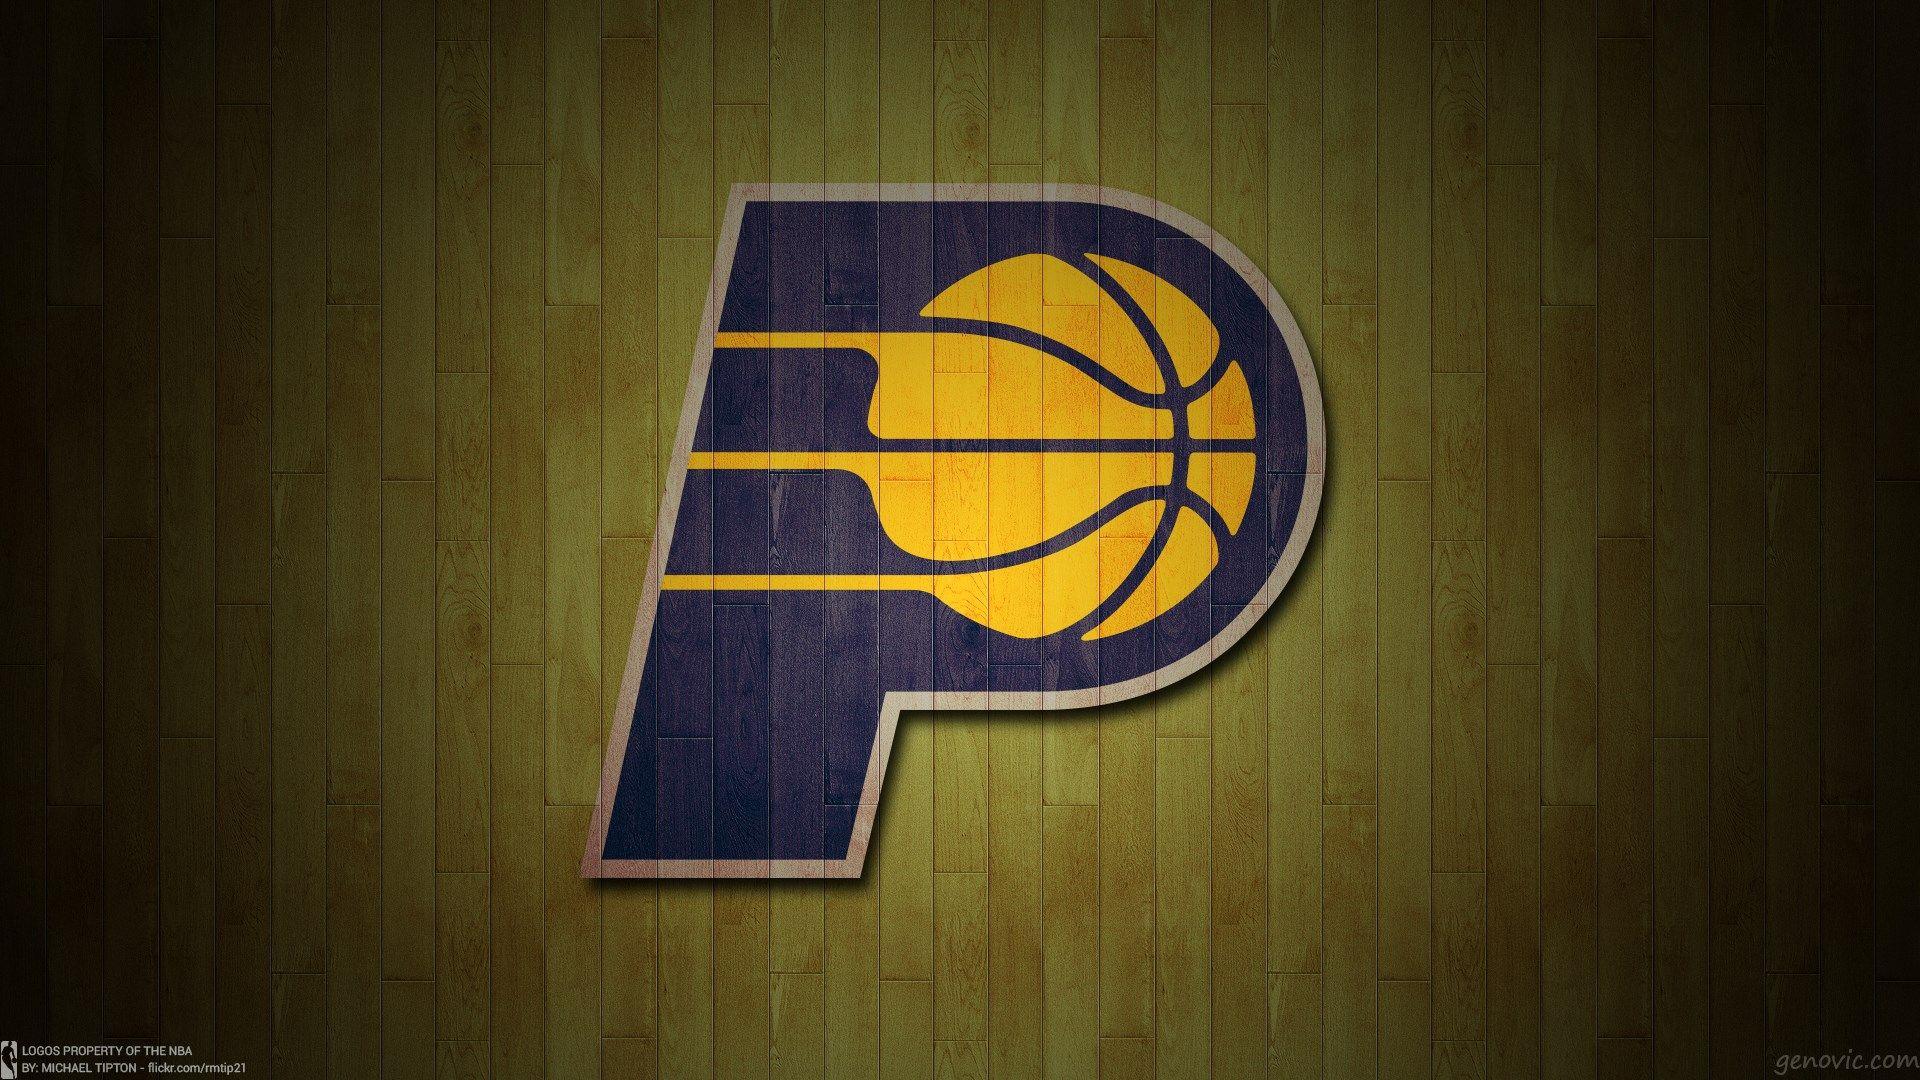 Indiana Pacers Wallpaper, Best & Inspirational High Quality